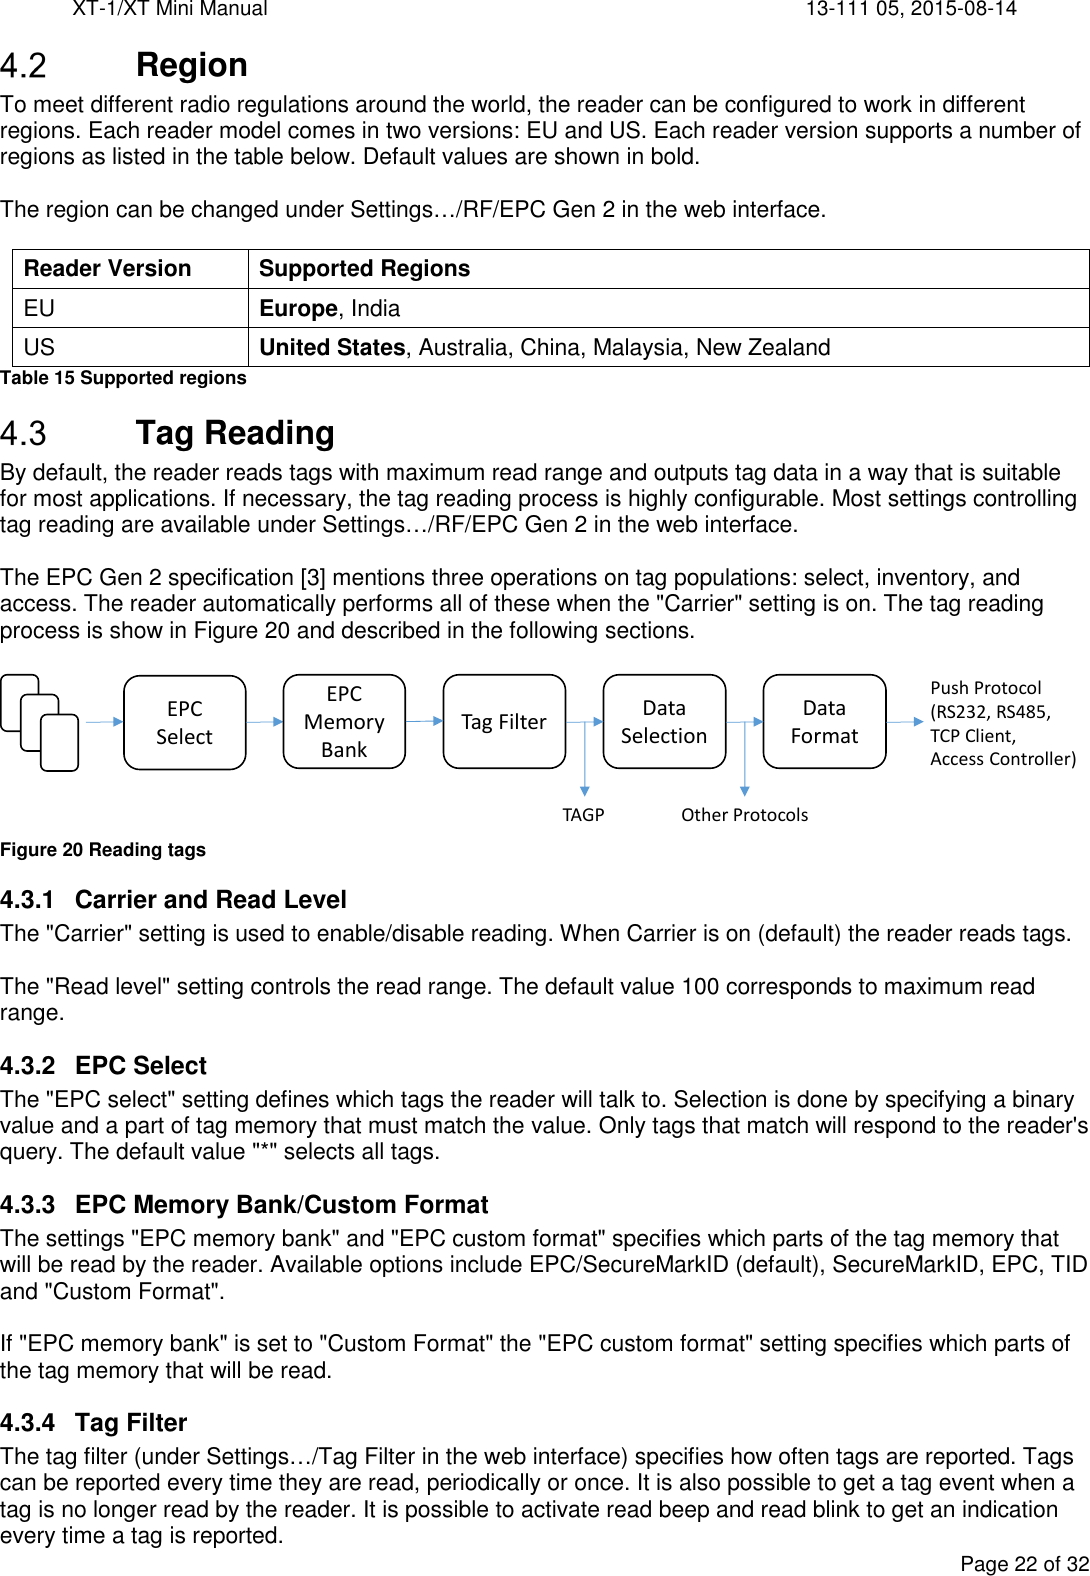 XT-1/XT Mini Manual     13-111 05, 2015-08-14  Page 22 of 32   Region To meet different radio regulations around the world, the reader can be configured to work in different regions. Each reader model comes in two versions: EU and US. Each reader version supports a number of regions as listed in the table below. Default values are shown in bold.  The region can be changed under Settings…/RF/EPC Gen 2 in the web interface.  Reader Version Supported Regions EU Europe, India US United States, Australia, China, Malaysia, New Zealand Table 15 Supported regions  Tag Reading By default, the reader reads tags with maximum read range and outputs tag data in a way that is suitable for most applications. If necessary, the tag reading process is highly configurable. Most settings controlling tag reading are available under Settings…/RF/EPC Gen 2 in the web interface.  The EPC Gen 2 specification [3] mentions three operations on tag populations: select, inventory, and access. The reader automatically performs all of these when the &quot;Carrier&quot; setting is on. The tag reading process is show in Figure 20 and described in the following sections.   Figure 20 Reading tags 4.3.1  Carrier and Read Level The &quot;Carrier&quot; setting is used to enable/disable reading. When Carrier is on (default) the reader reads tags.  The &quot;Read level&quot; setting controls the read range. The default value 100 corresponds to maximum read range. 4.3.2  EPC Select The &quot;EPC select&quot; setting defines which tags the reader will talk to. Selection is done by specifying a binary value and a part of tag memory that must match the value. Only tags that match will respond to the reader&apos;s query. The default value &quot;*&quot; selects all tags. 4.3.3  EPC Memory Bank/Custom Format The settings &quot;EPC memory bank&quot; and &quot;EPC custom format&quot; specifies which parts of the tag memory that will be read by the reader. Available options include EPC/SecureMarkID (default), SecureMarkID, EPC, TID and &quot;Custom Format&quot;.  If &quot;EPC memory bank&quot; is set to &quot;Custom Format&quot; the &quot;EPC custom format&quot; setting specifies which parts of the tag memory that will be read. 4.3.4  Tag Filter The tag filter (under Settings…/Tag Filter in the web interface) specifies how often tags are reported. Tags can be reported every time they are read, periodically or once. It is also possible to get a tag event when a tag is no longer read by the reader. It is possible to activate read beep and read blink to get an indication every time a tag is reported. EPC Select Tag Filter Data SelectionData FormatEPC MemoryBankTAGP Other ProtocolsPush Protocol(RS232, RS485,TCP Client,Access Controller)